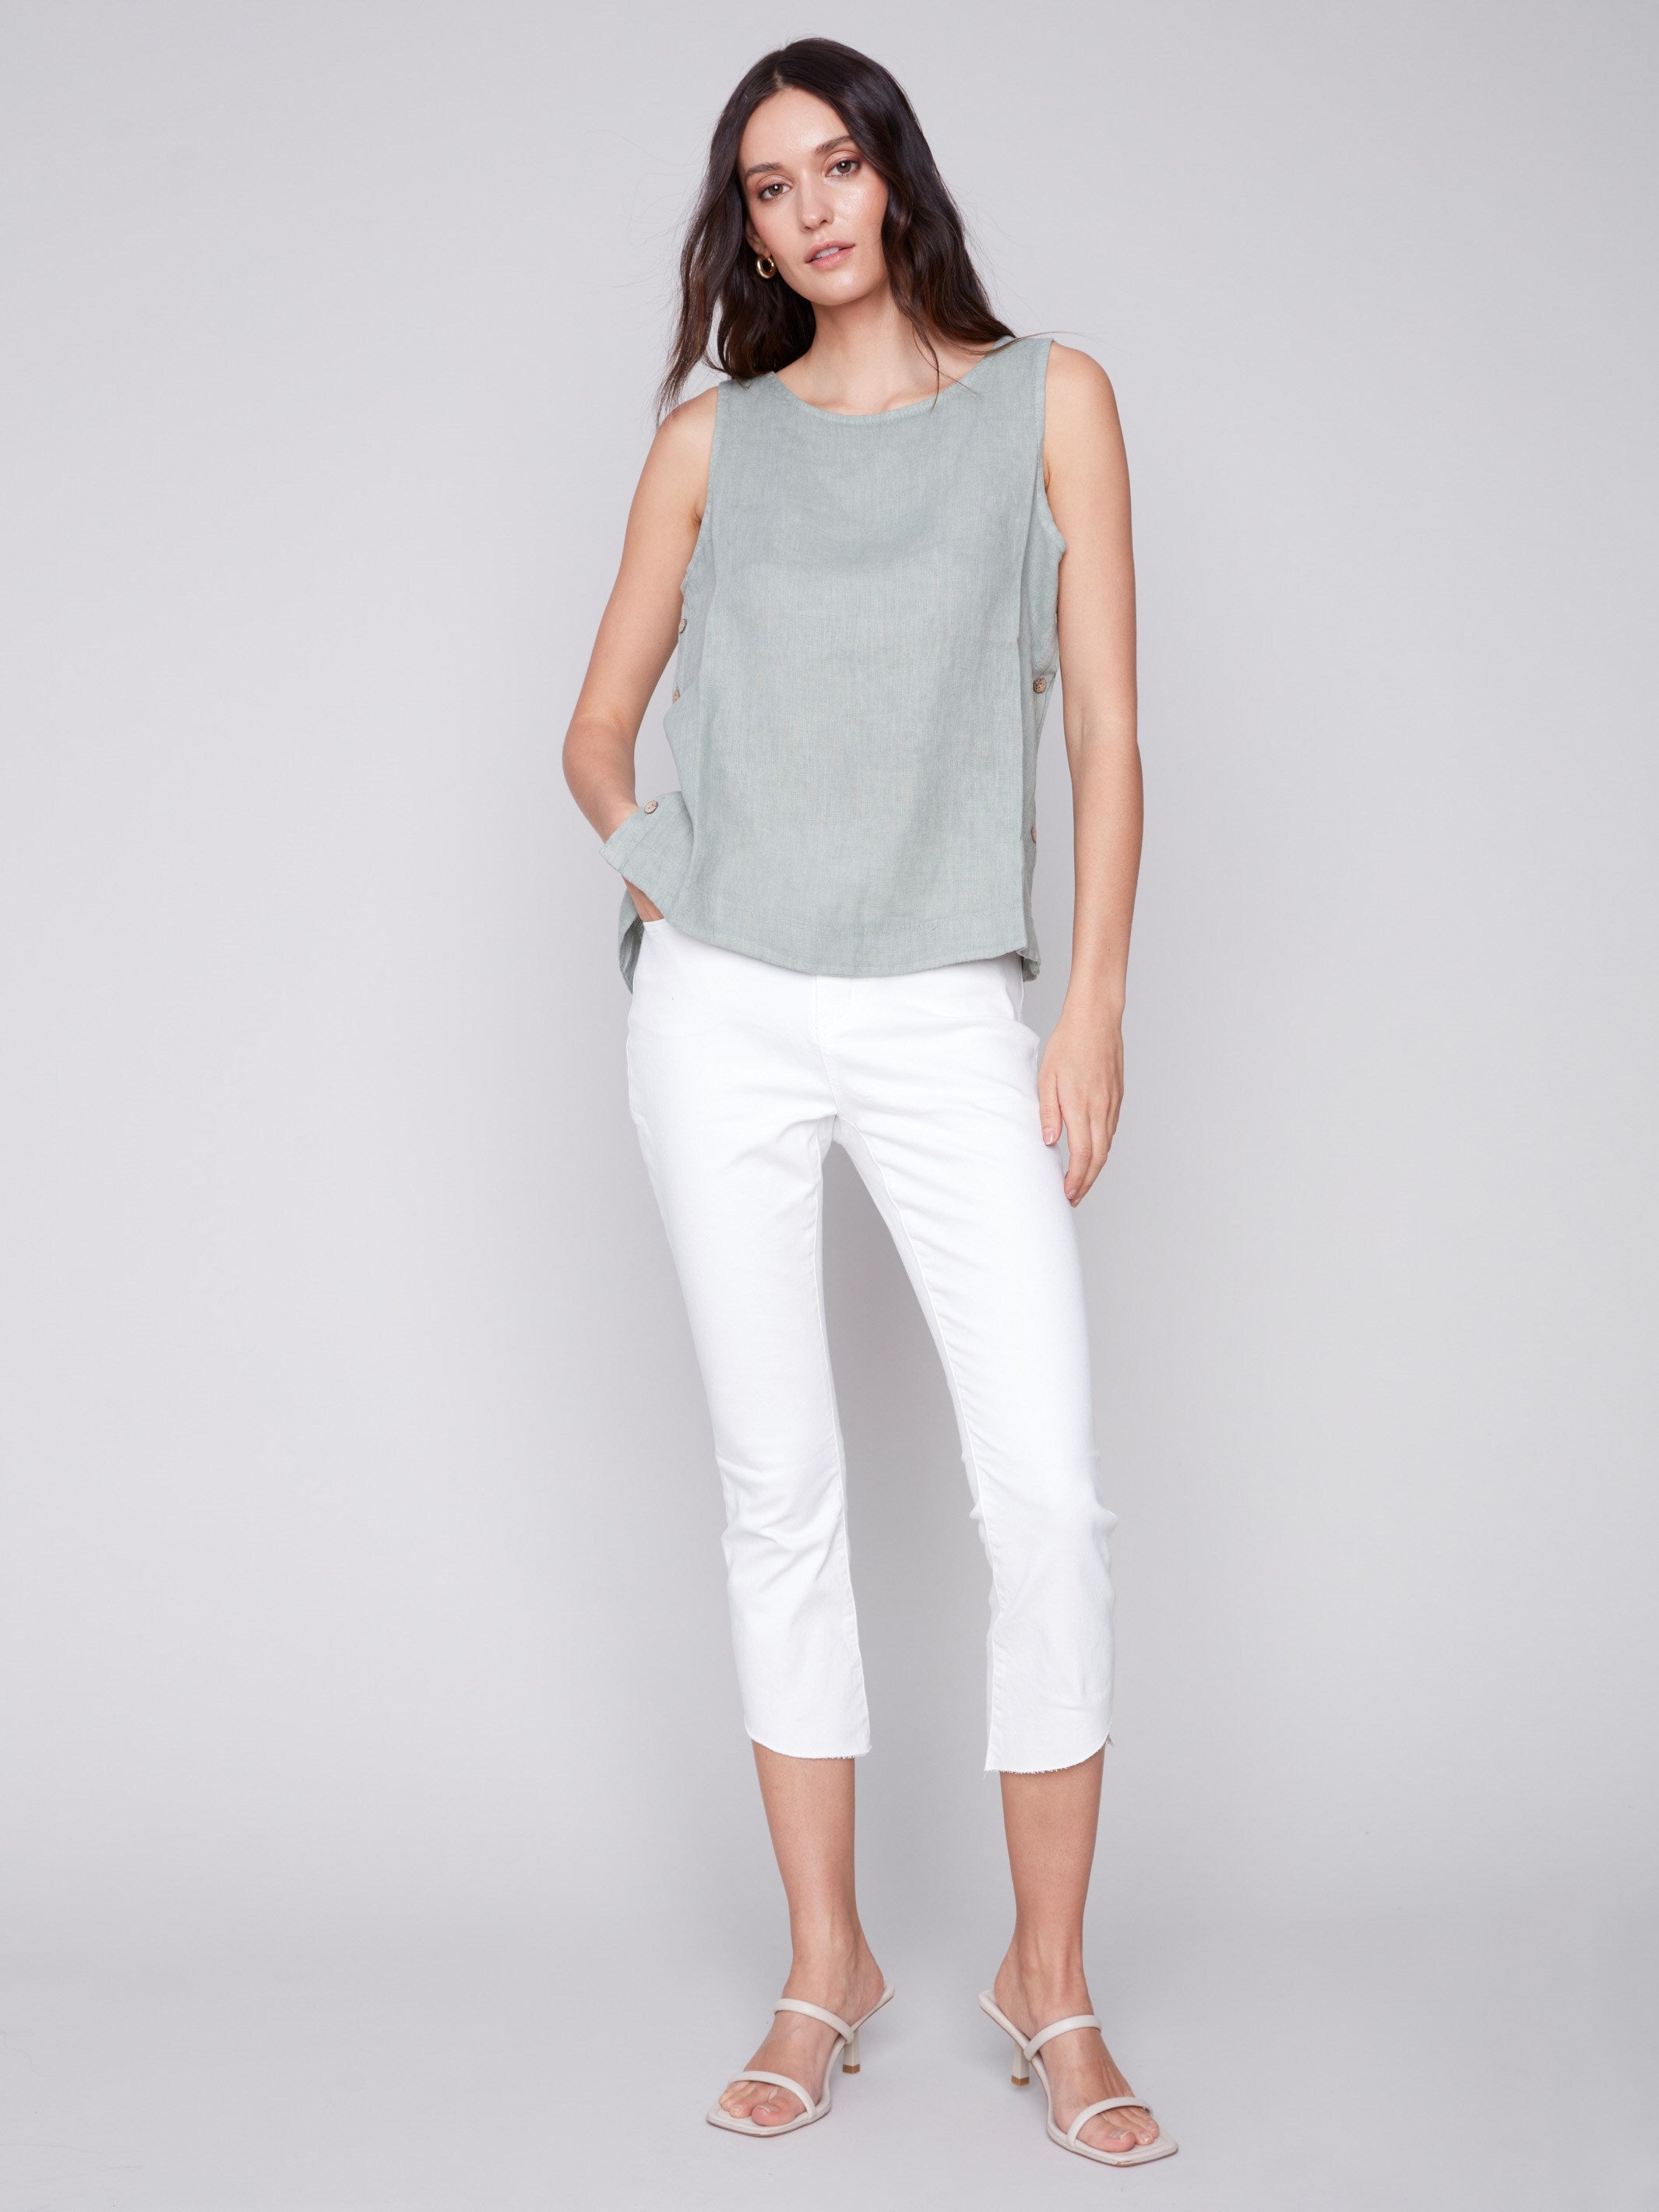 Charlie B Sleeveless Linen Top with Side Buttons - Celadon - Image 3